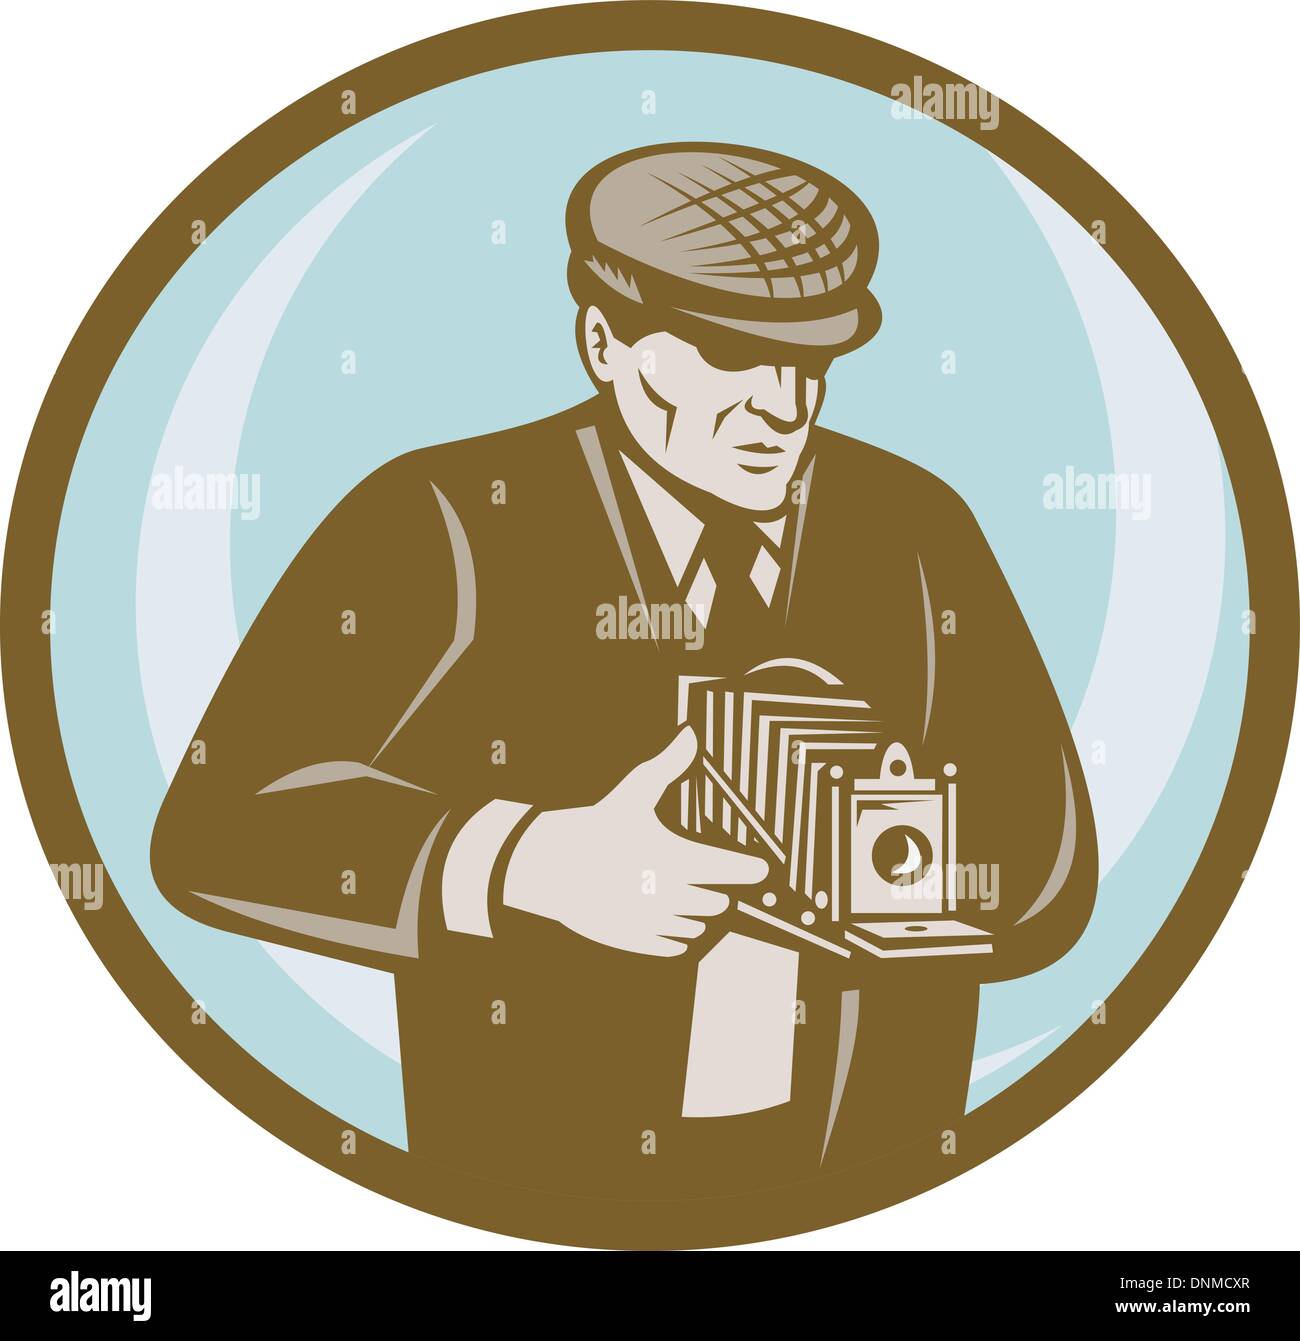 illustration of a Photographer with hat aiming retro vintage camera done in retro style Stock Vector